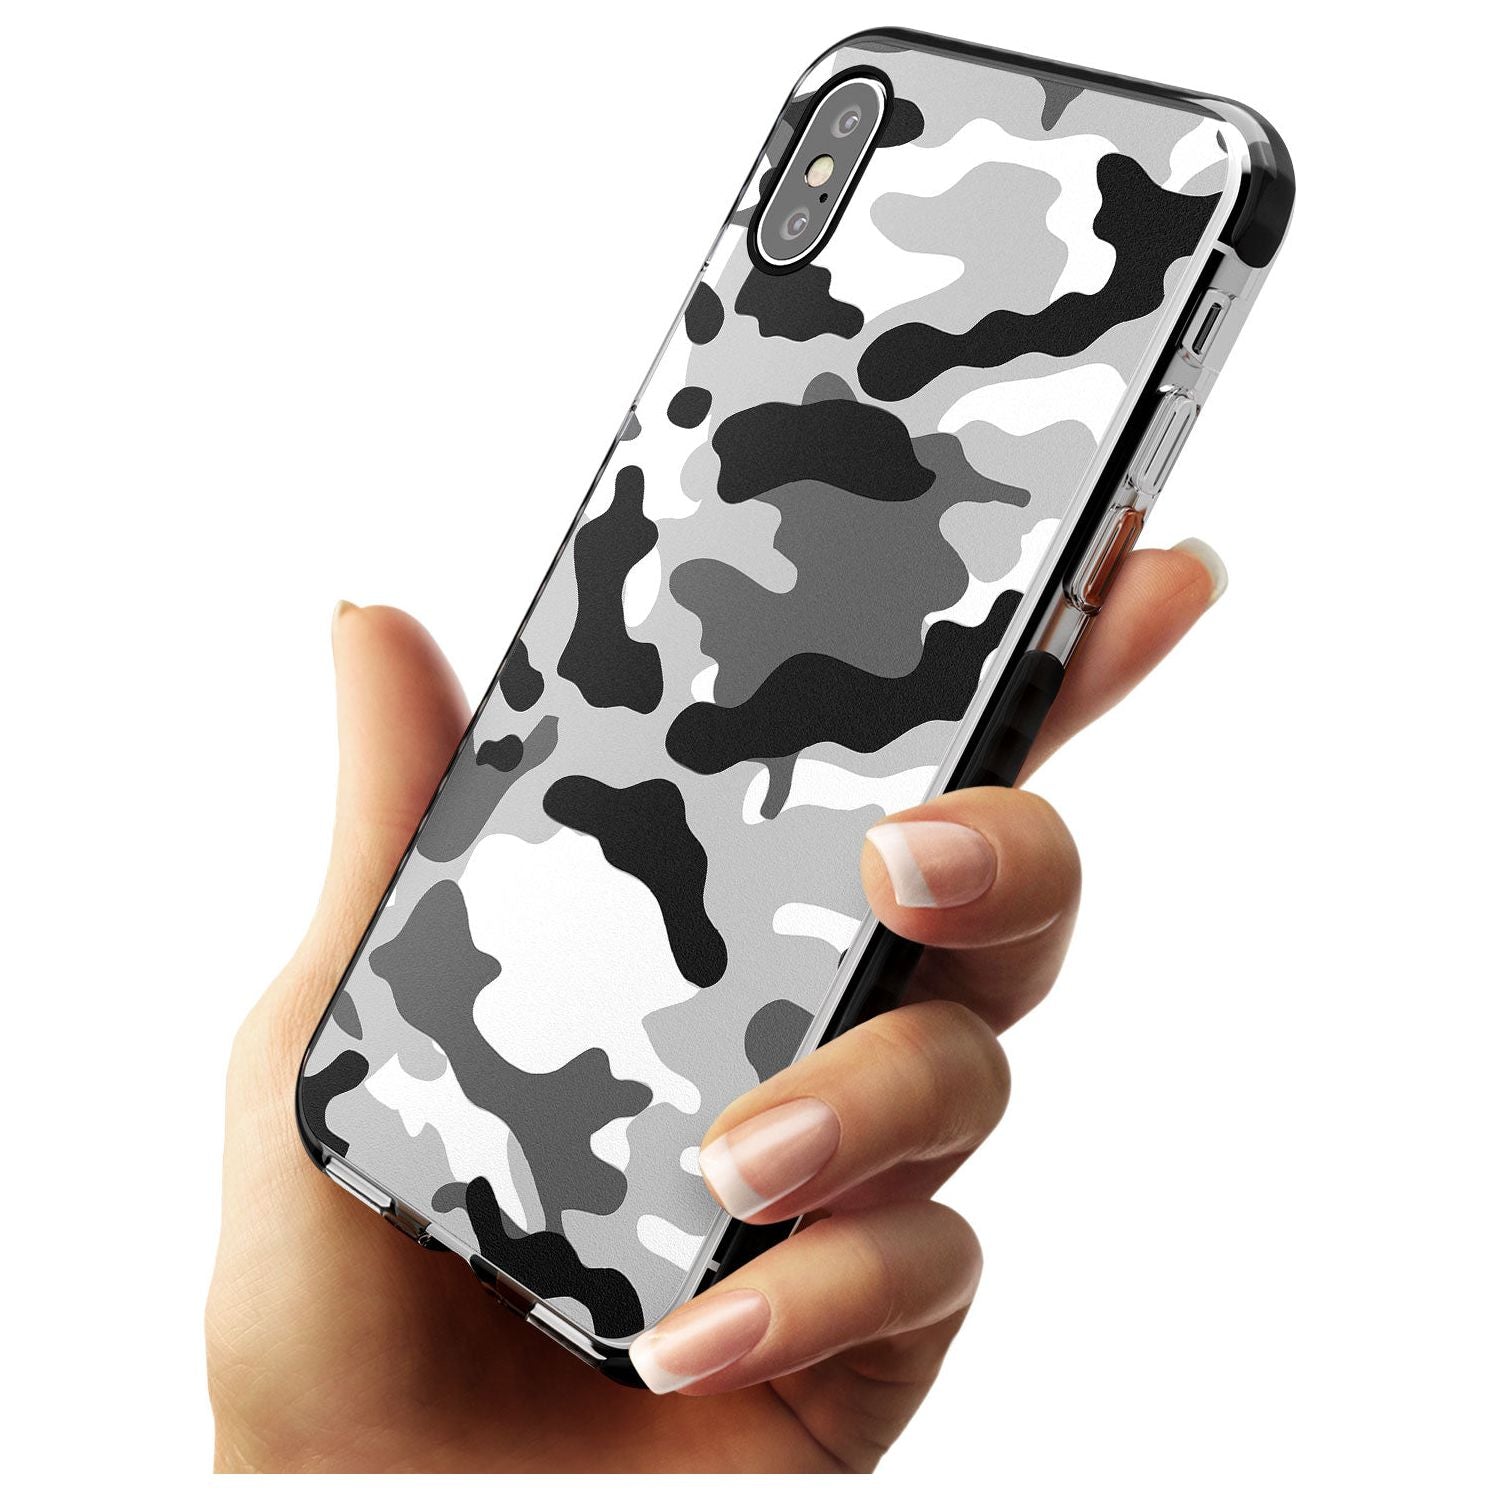 Grey Camo Black Impact Phone Case for iPhone X XS Max XR